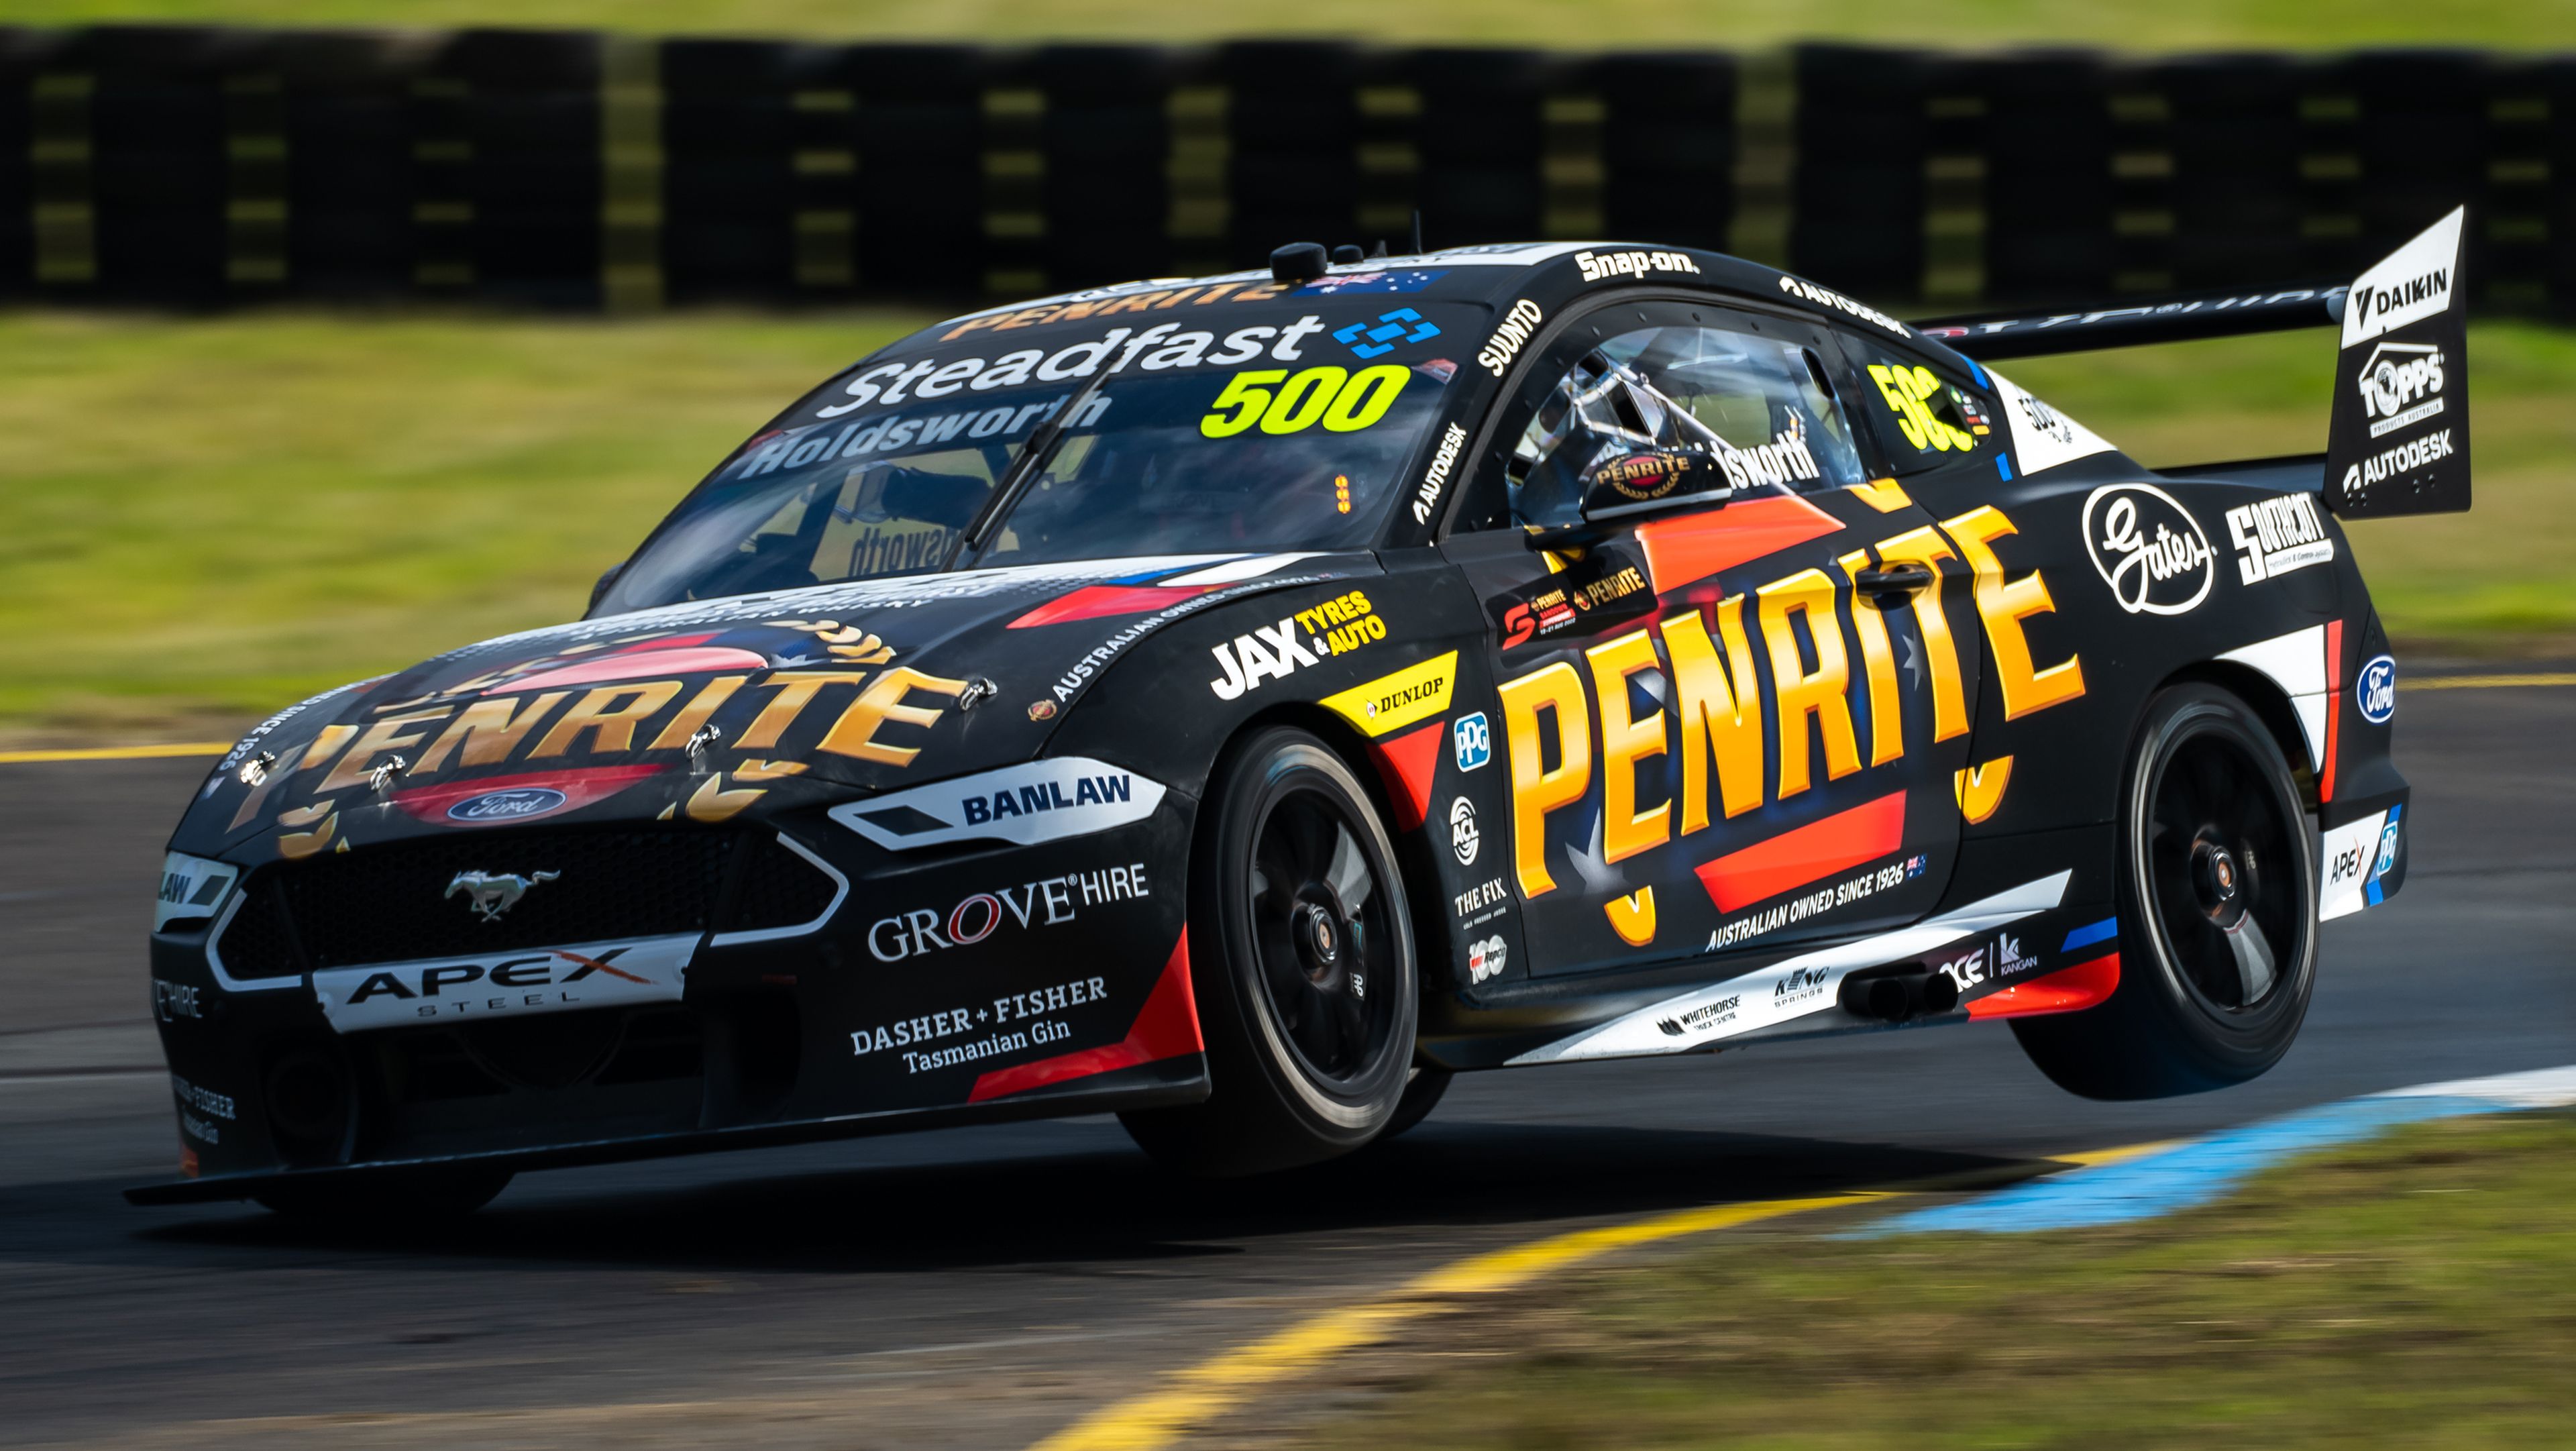 Lee Holdsworth pilots the No.26 Penrite Racing Ford Mustang in Supercars for Grove Racing.